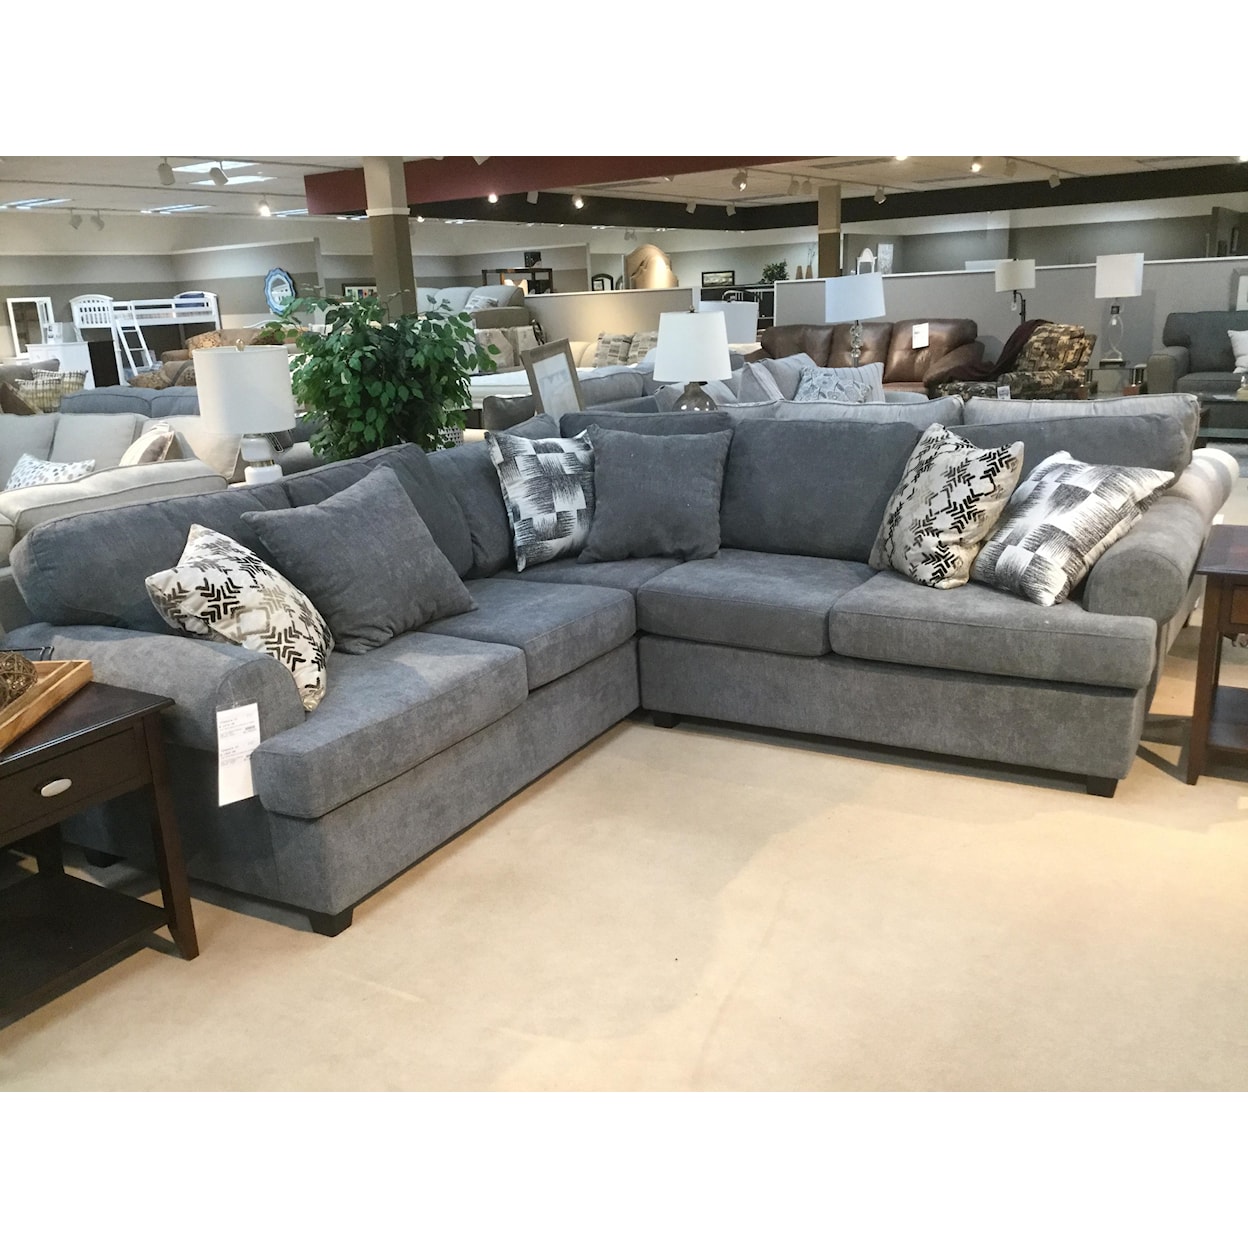 Edgewood Furniture 2172 2 Pc Sectional